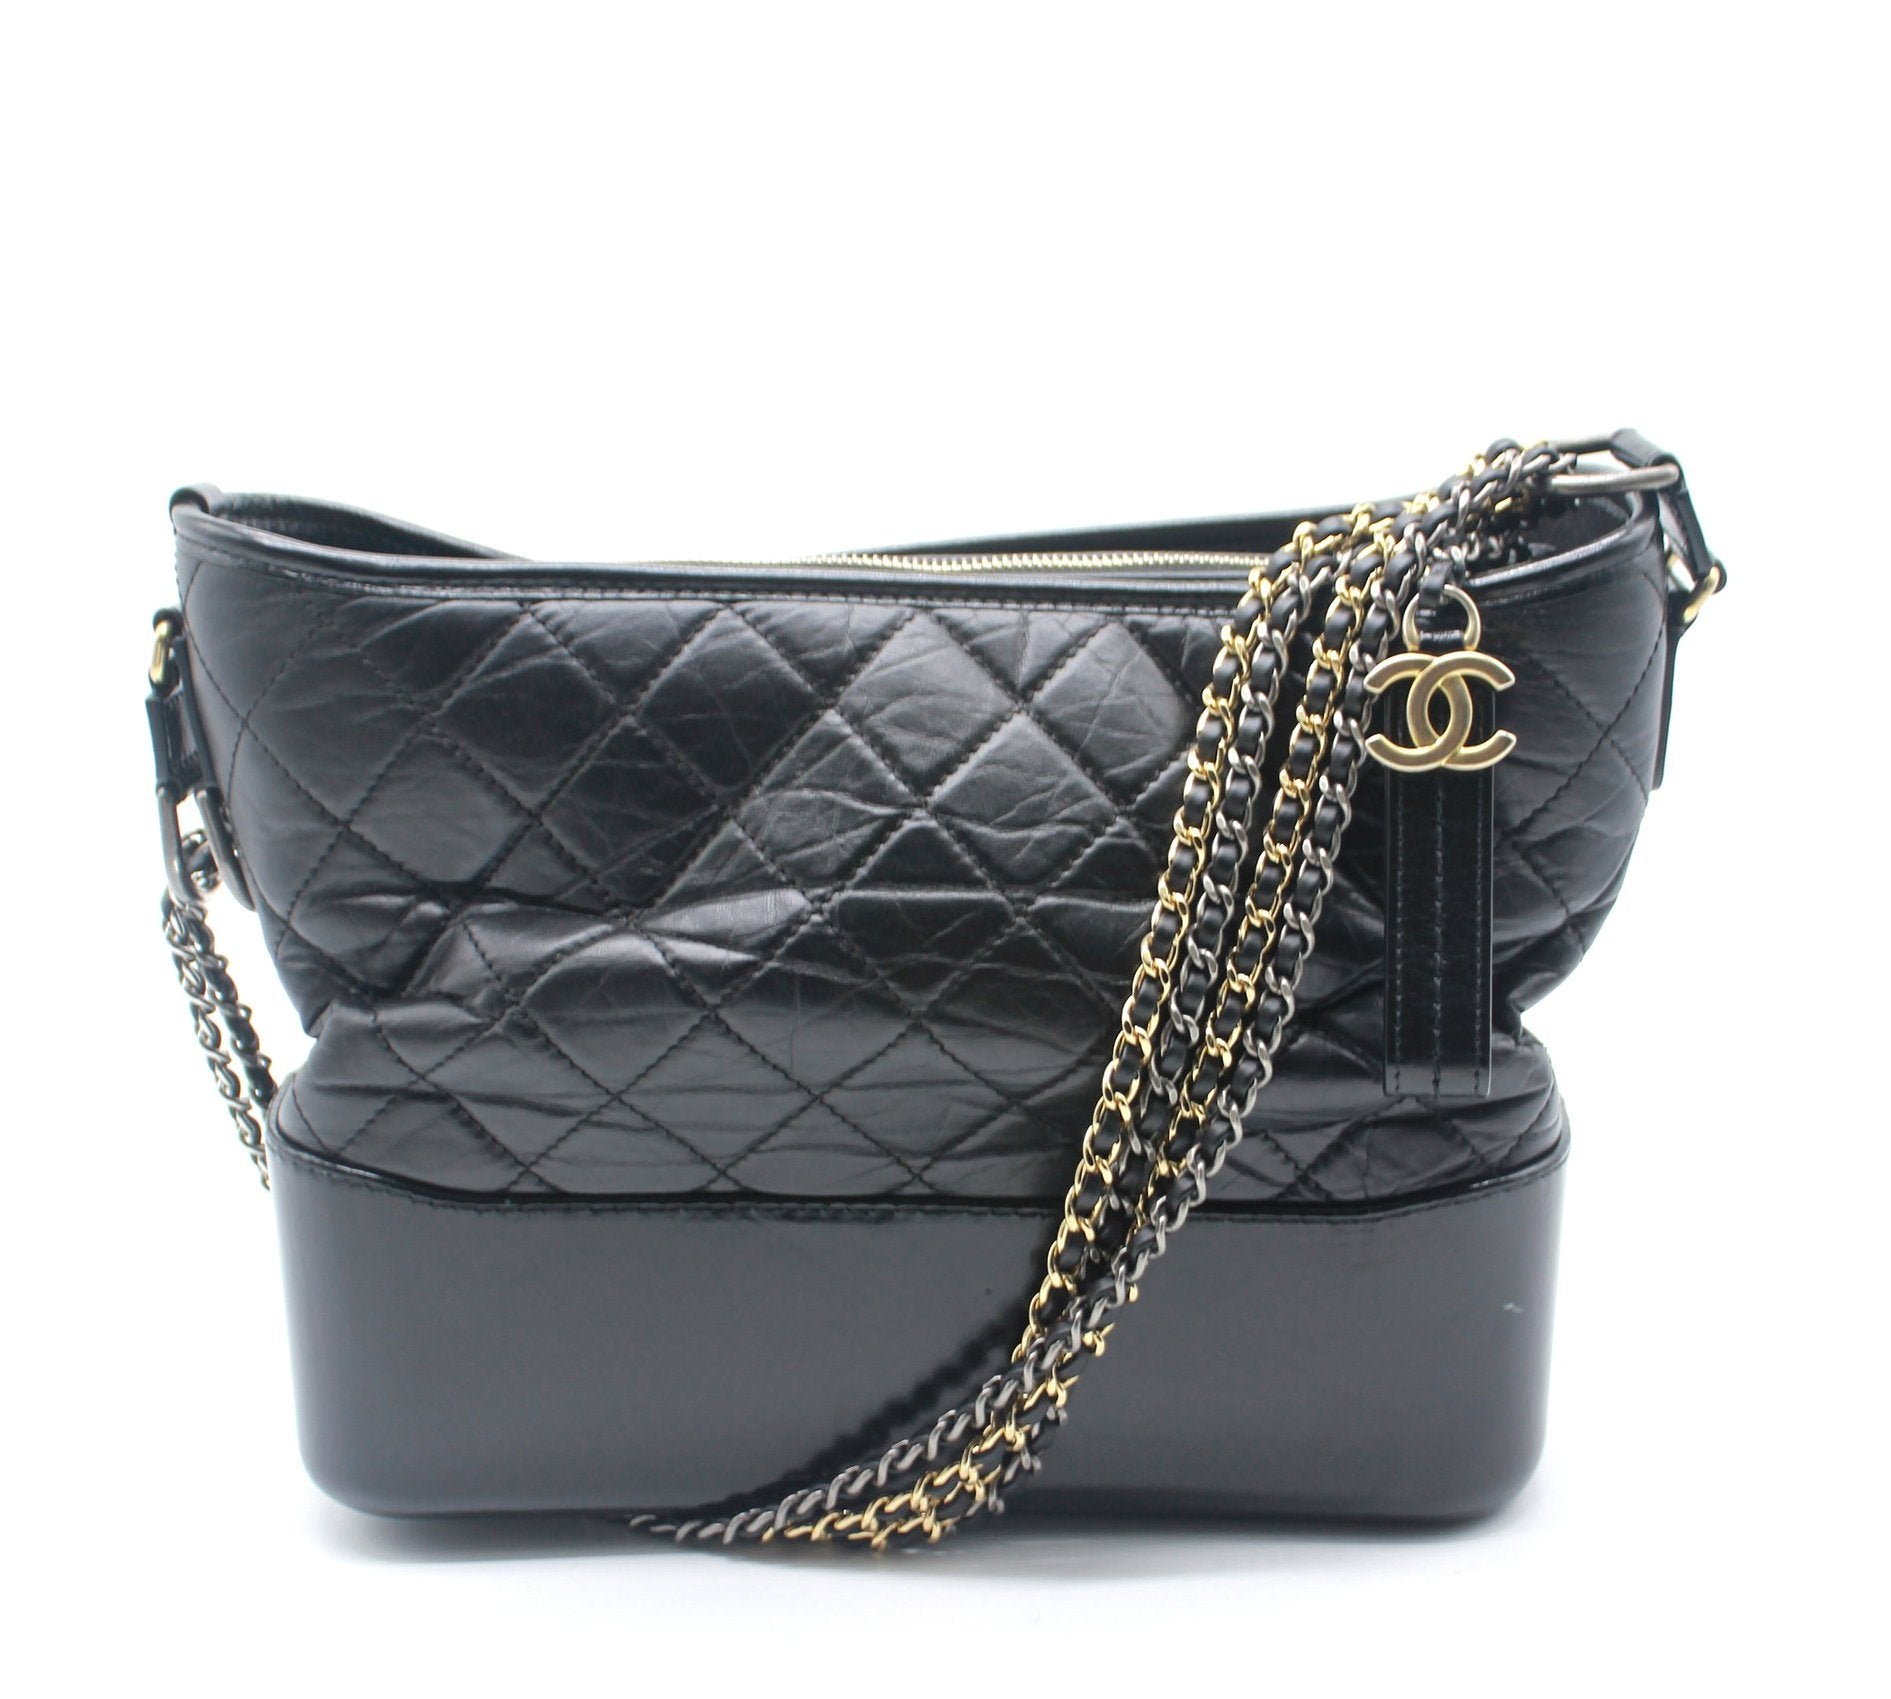 Black Quilted Aged Calfskin Leather Gabrielle Hobo Bag – STYLISHTOP